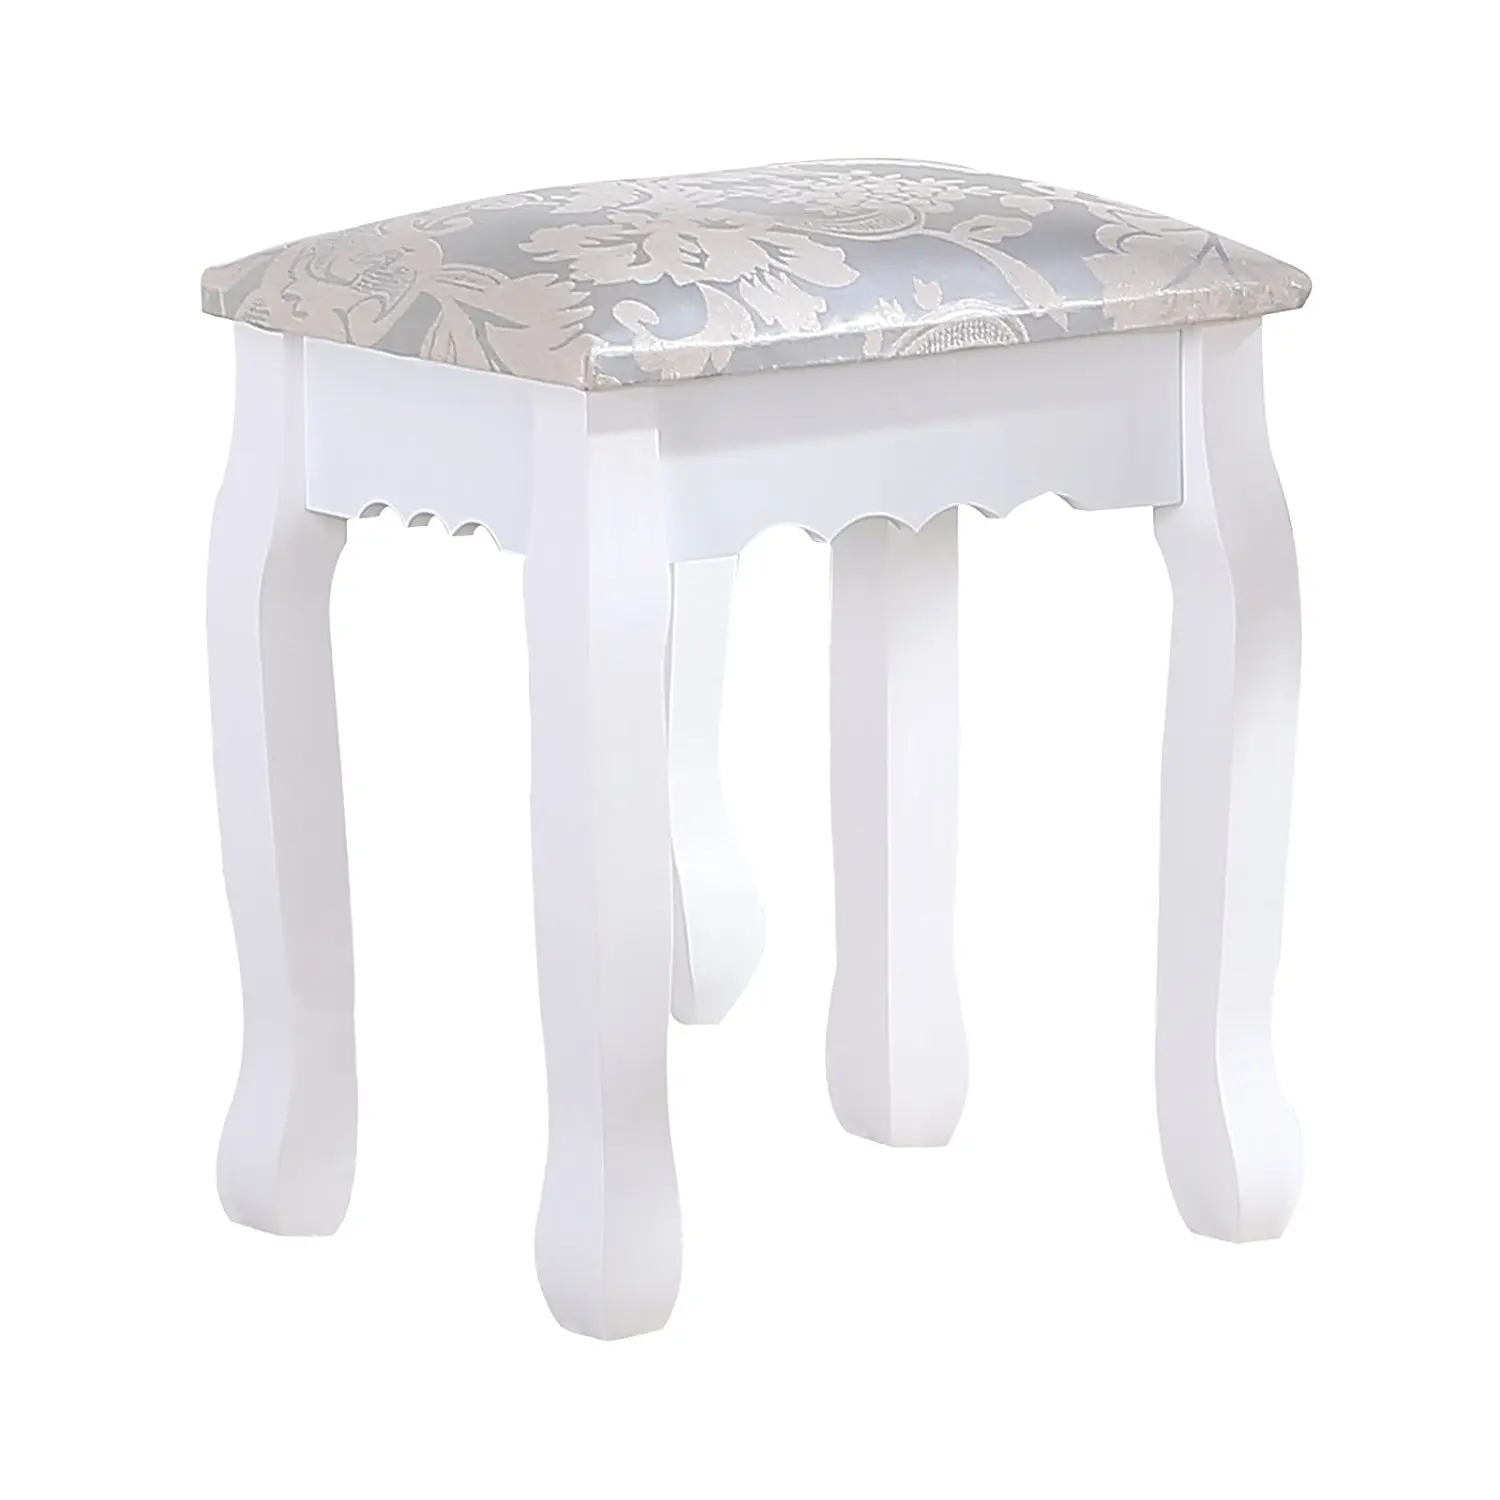 33 * 22 * 43.5 cm Cream White Vanity Stool Dressing Table Stool Makeup Baroque Vintage Piano Chair Cushion Padded Makeup Seat for Bedroom